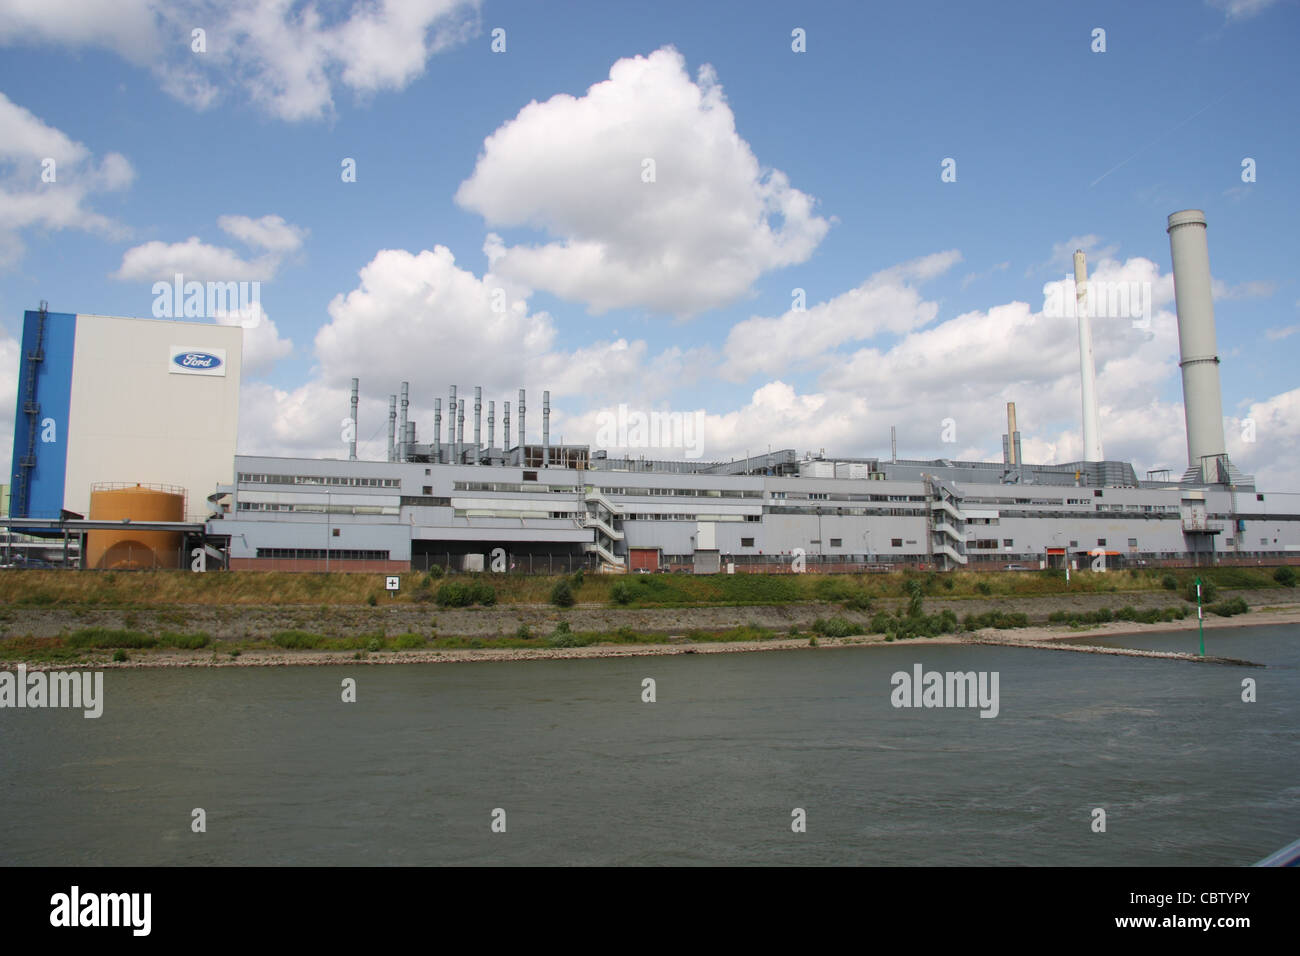 Ford automobile plant at Leverkusen on the Rhine River, Germany Stock Photo